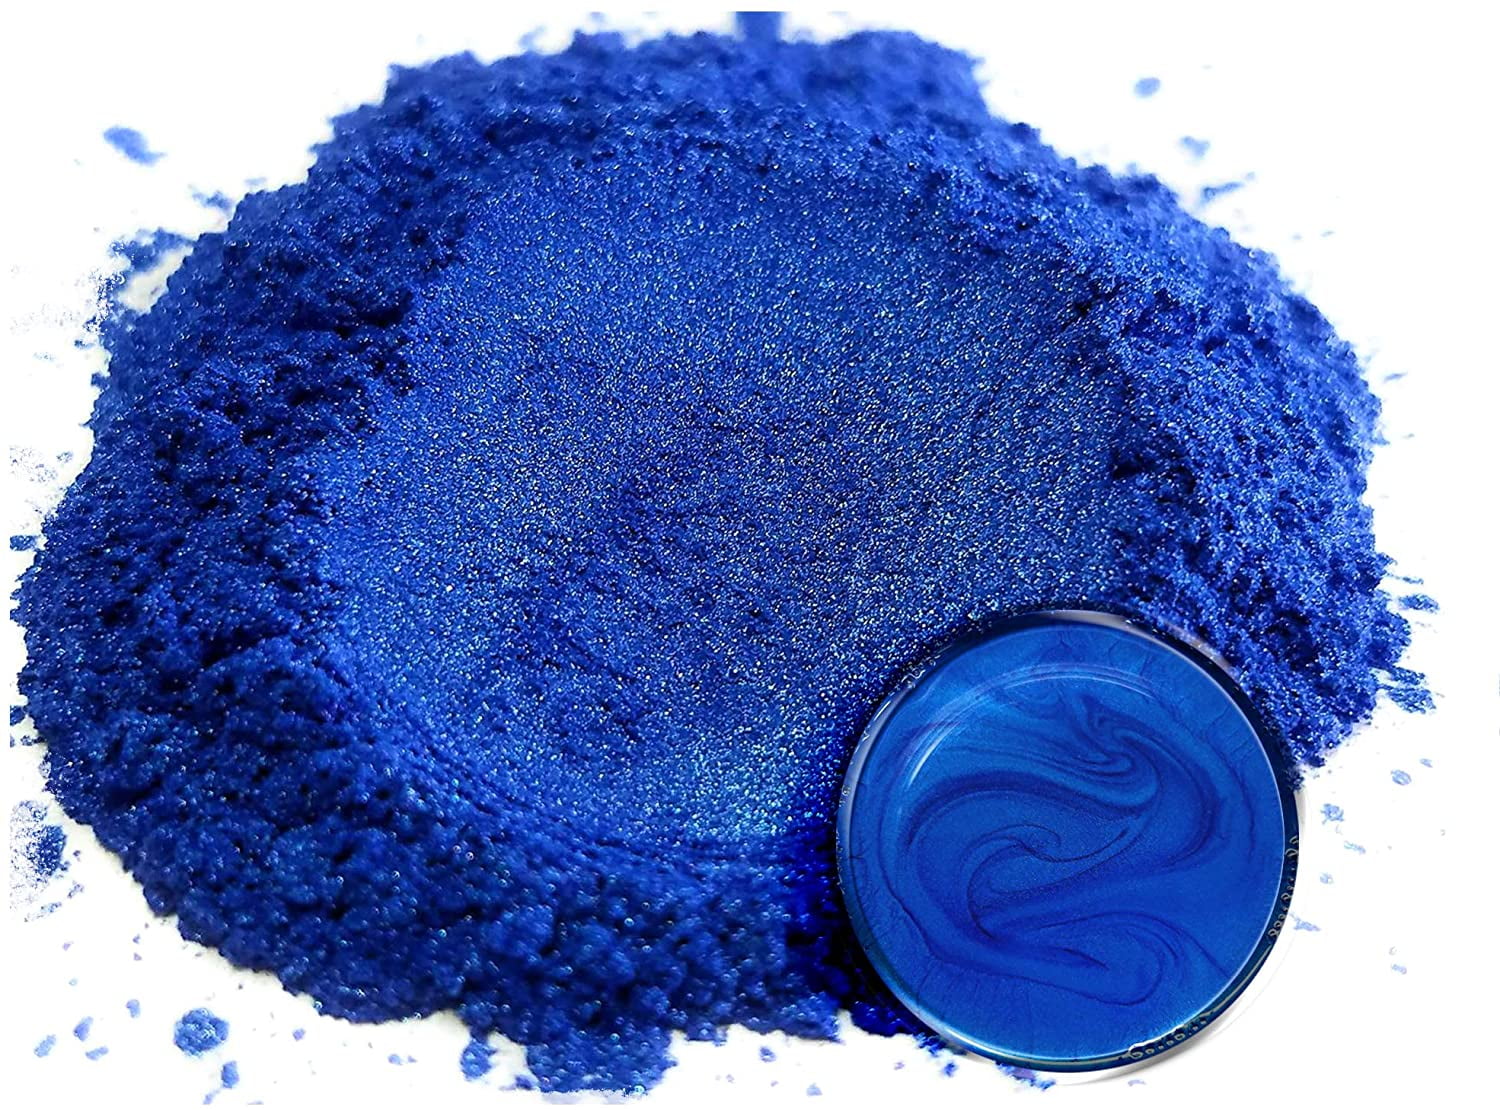 Pacific Blue - Eye Candy Pigments - Blue Mica Pigment Powders